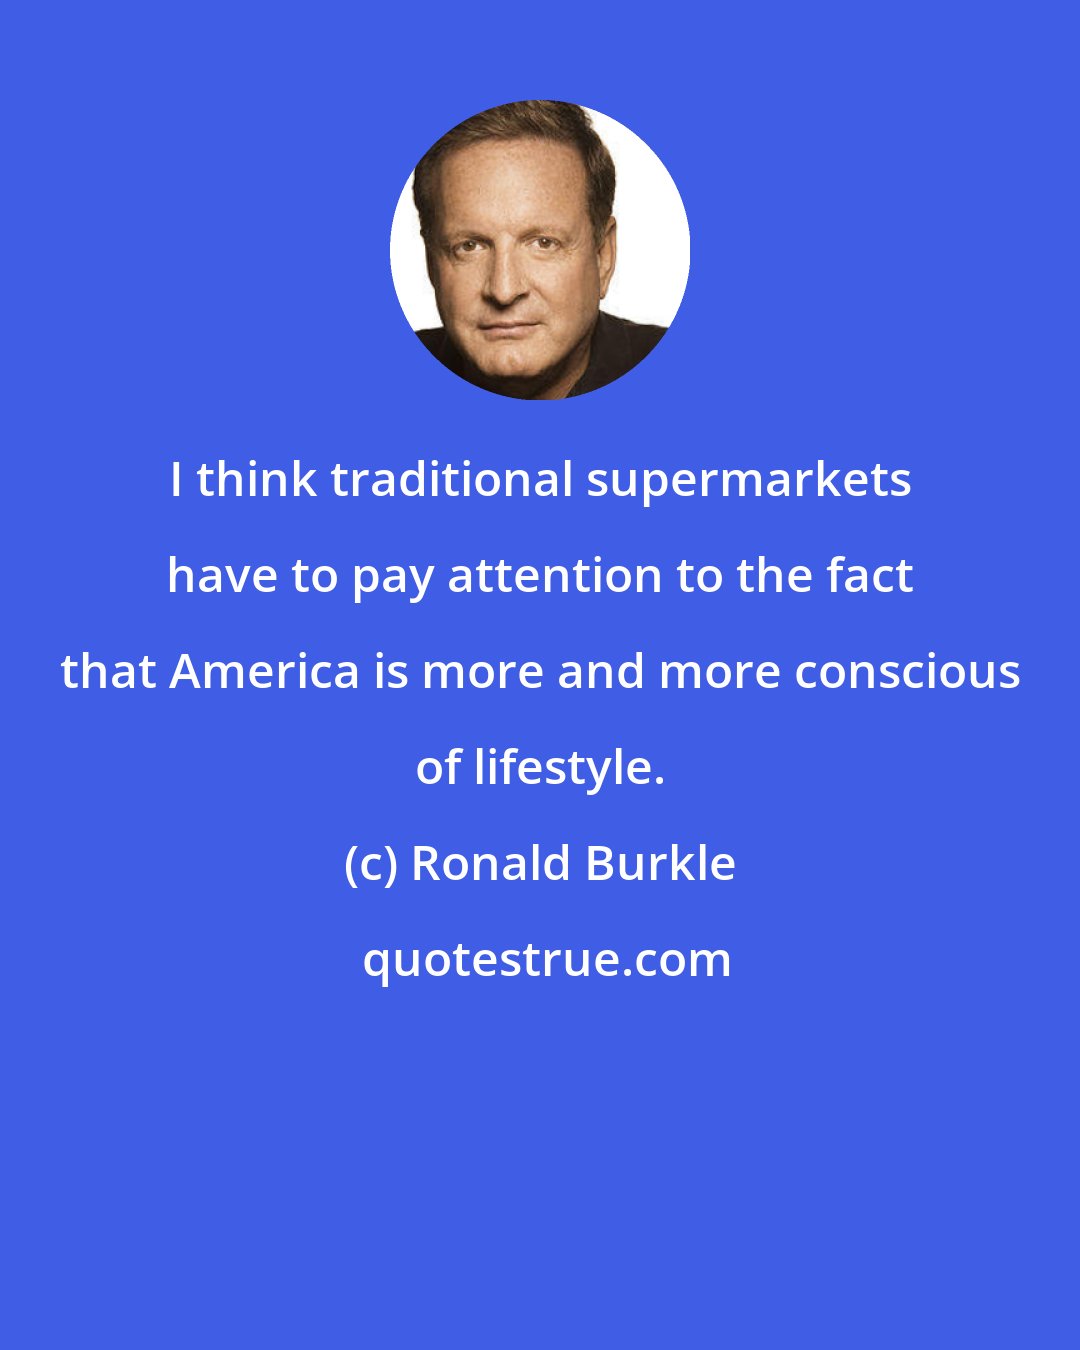 Ronald Burkle: I think traditional supermarkets have to pay attention to the fact that America is more and more conscious of lifestyle.